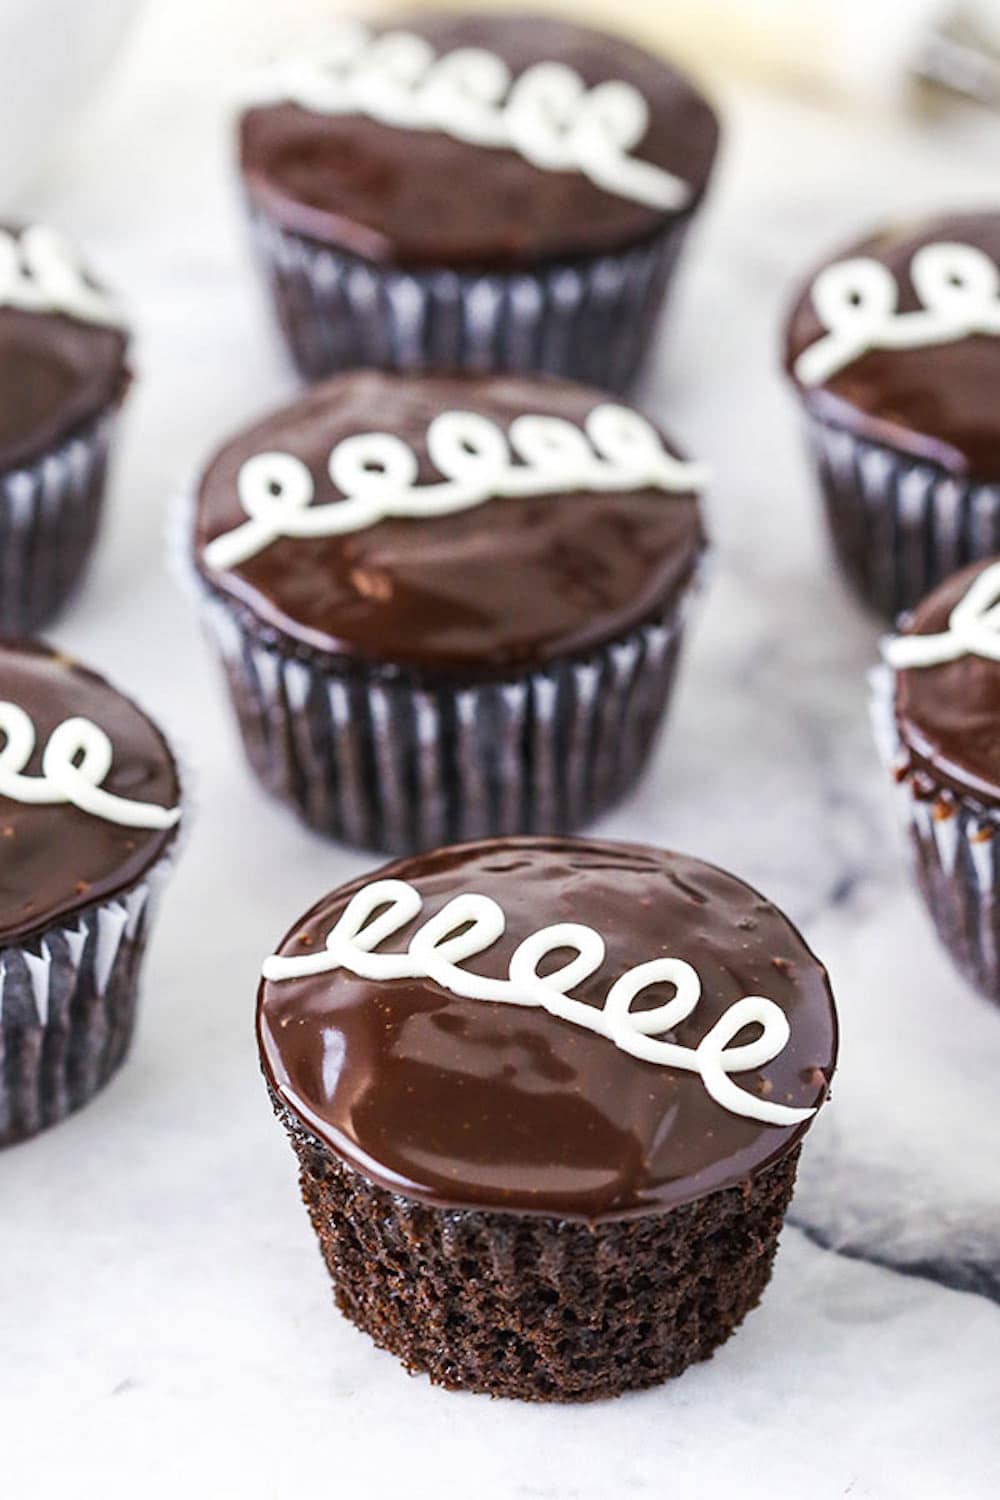 Homemade Hostess Cupcakes Lined up on a Black and White Marble Surface.